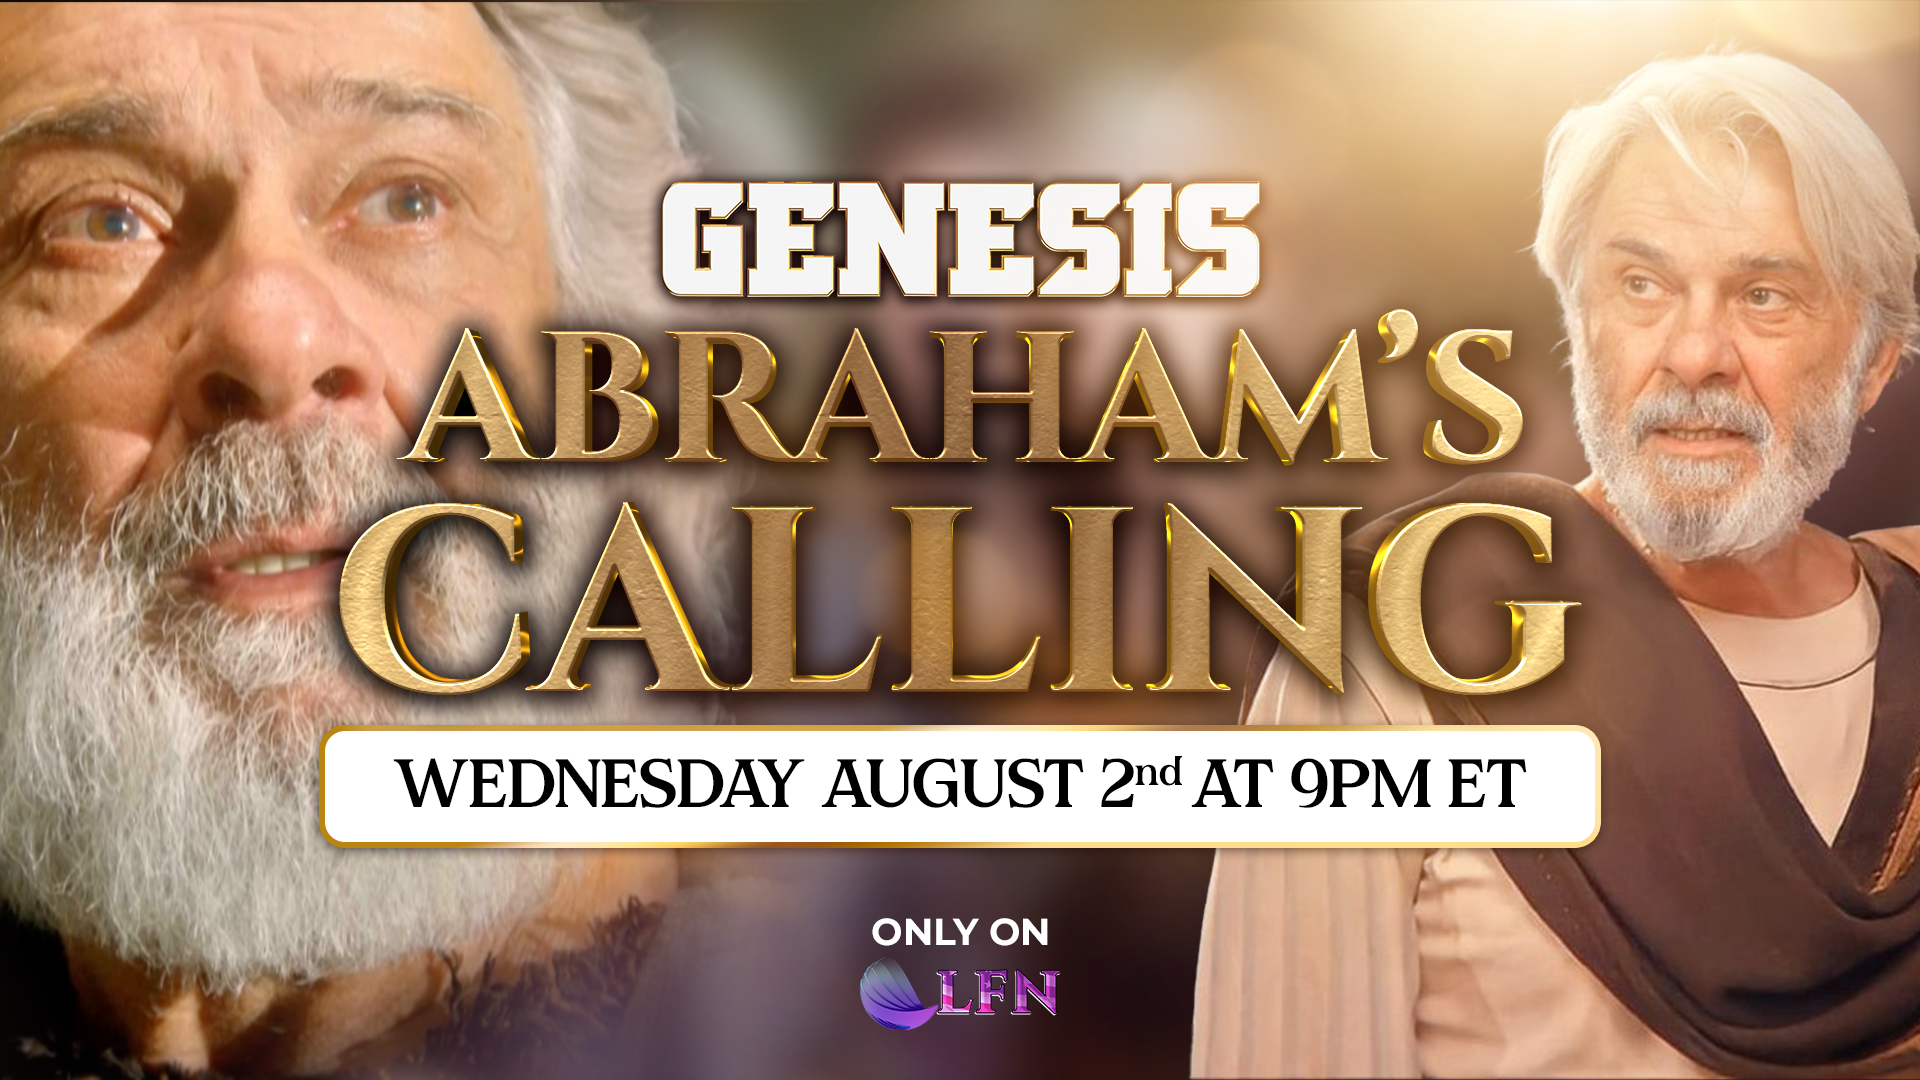 The Call of Abraham This Wednesday on GENESIS, the Series